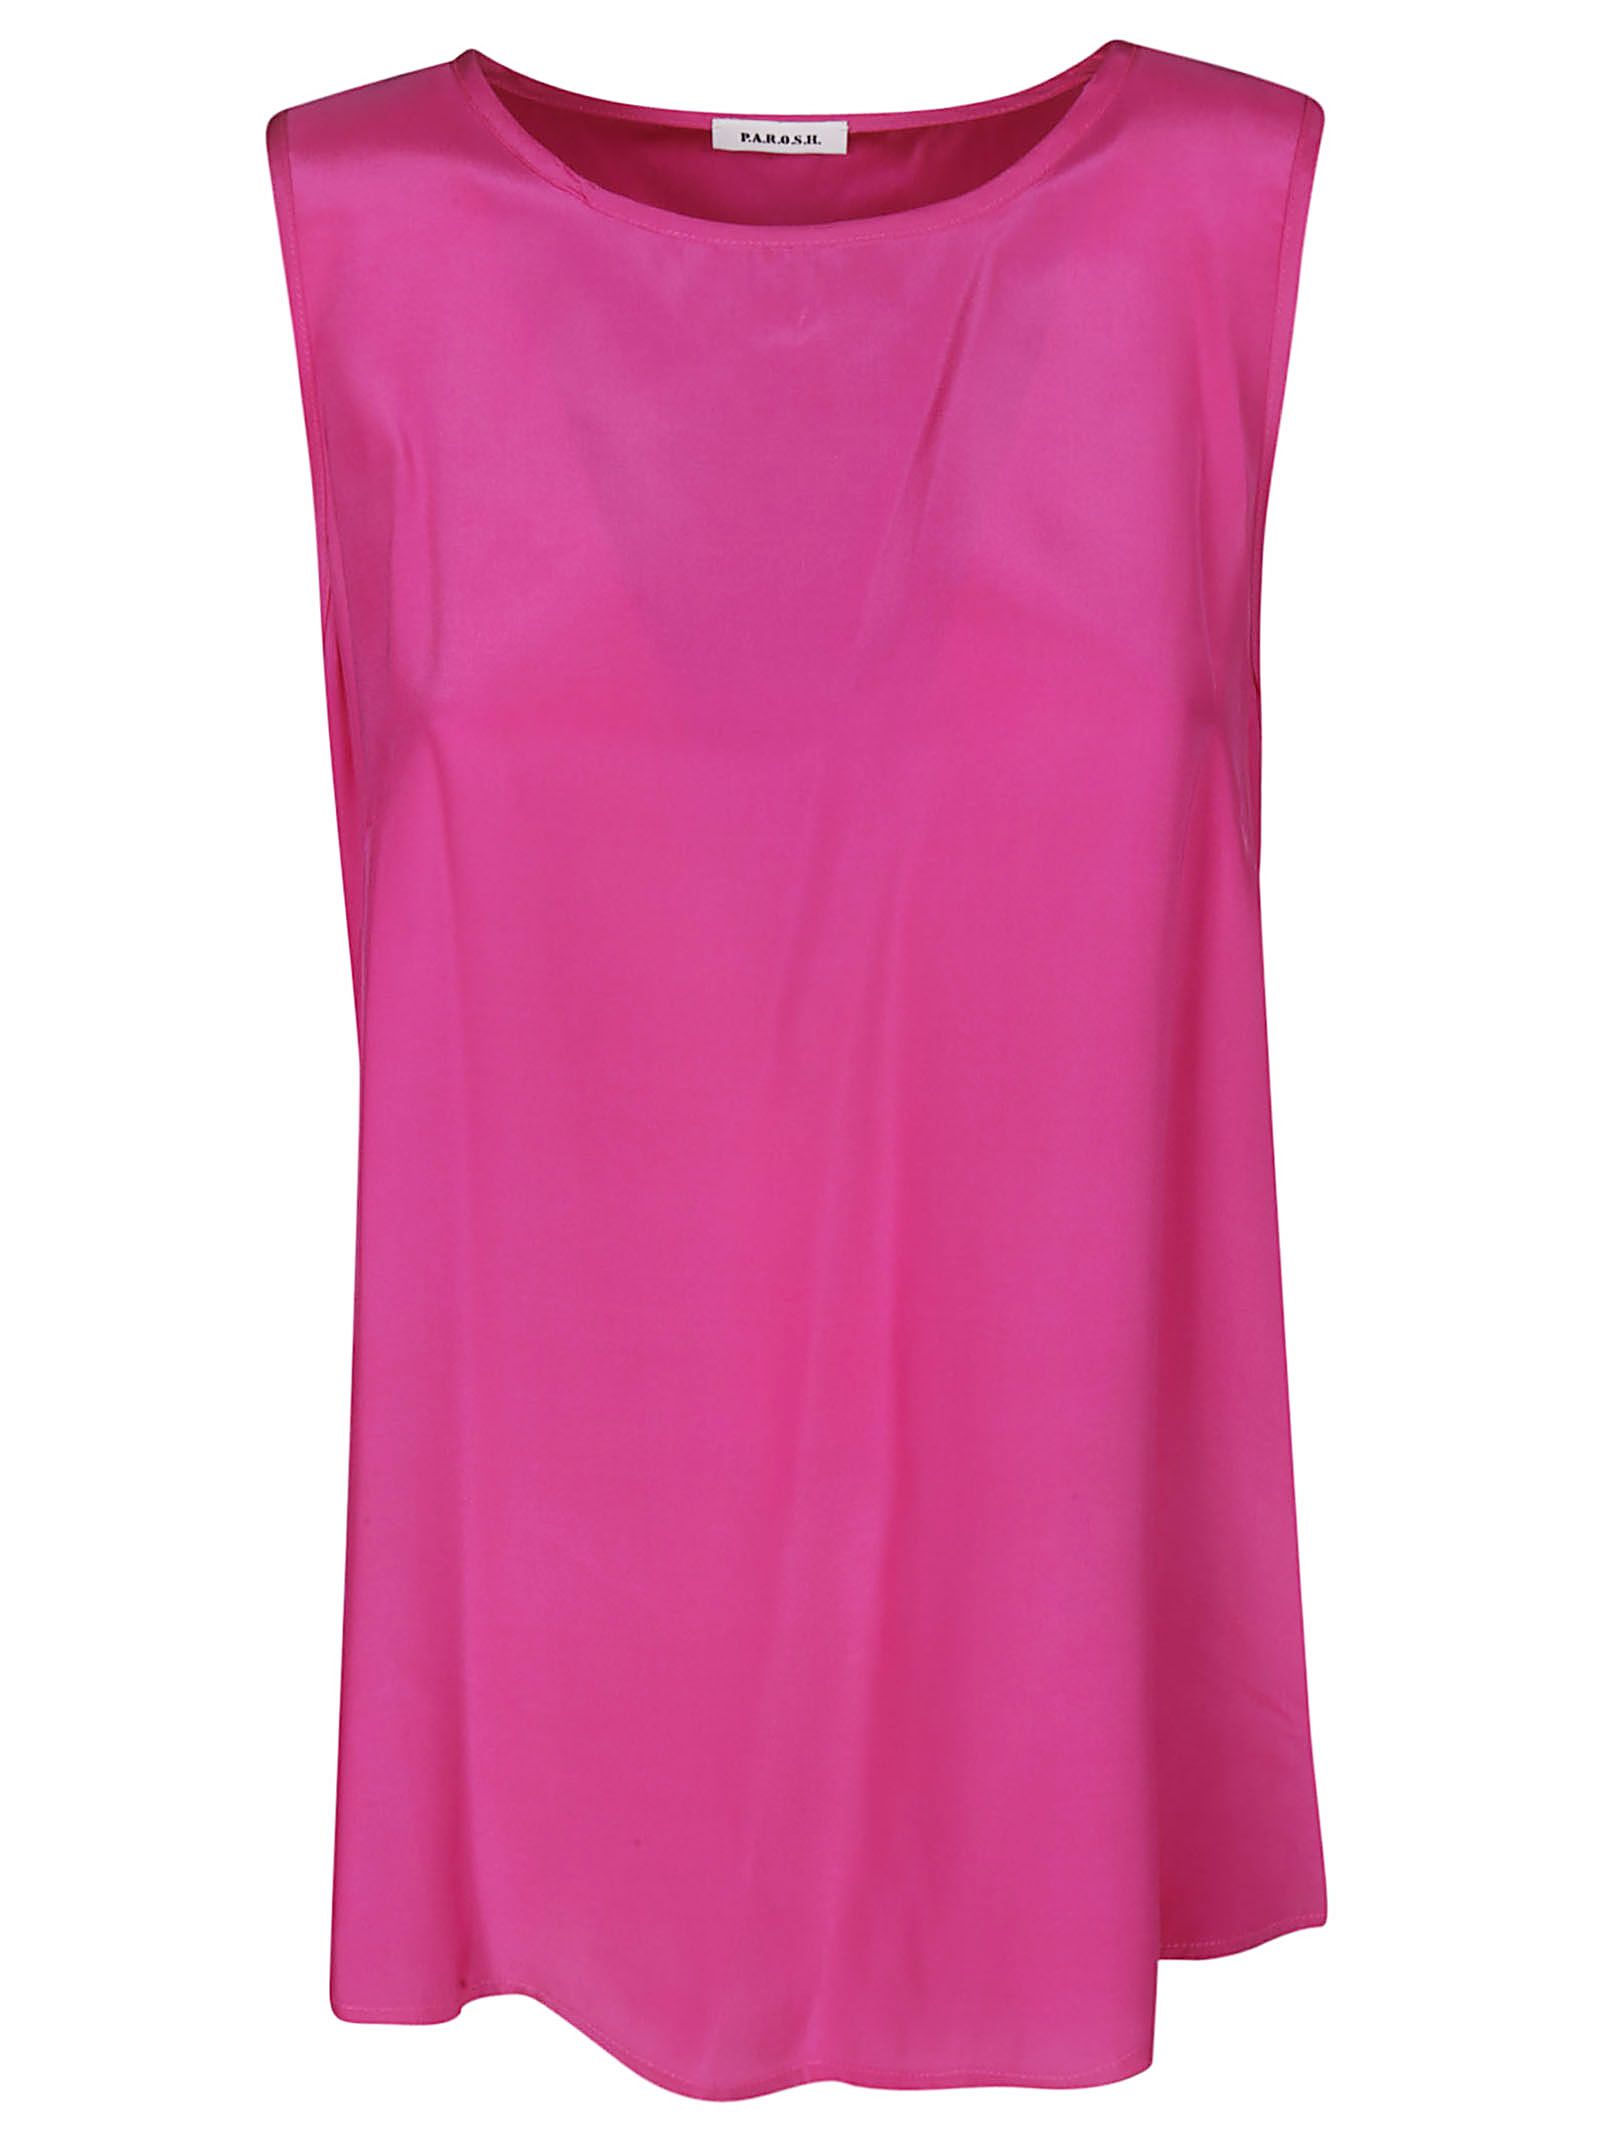 P.A.R.O.S.H SOFTER TANK TOP,10855801